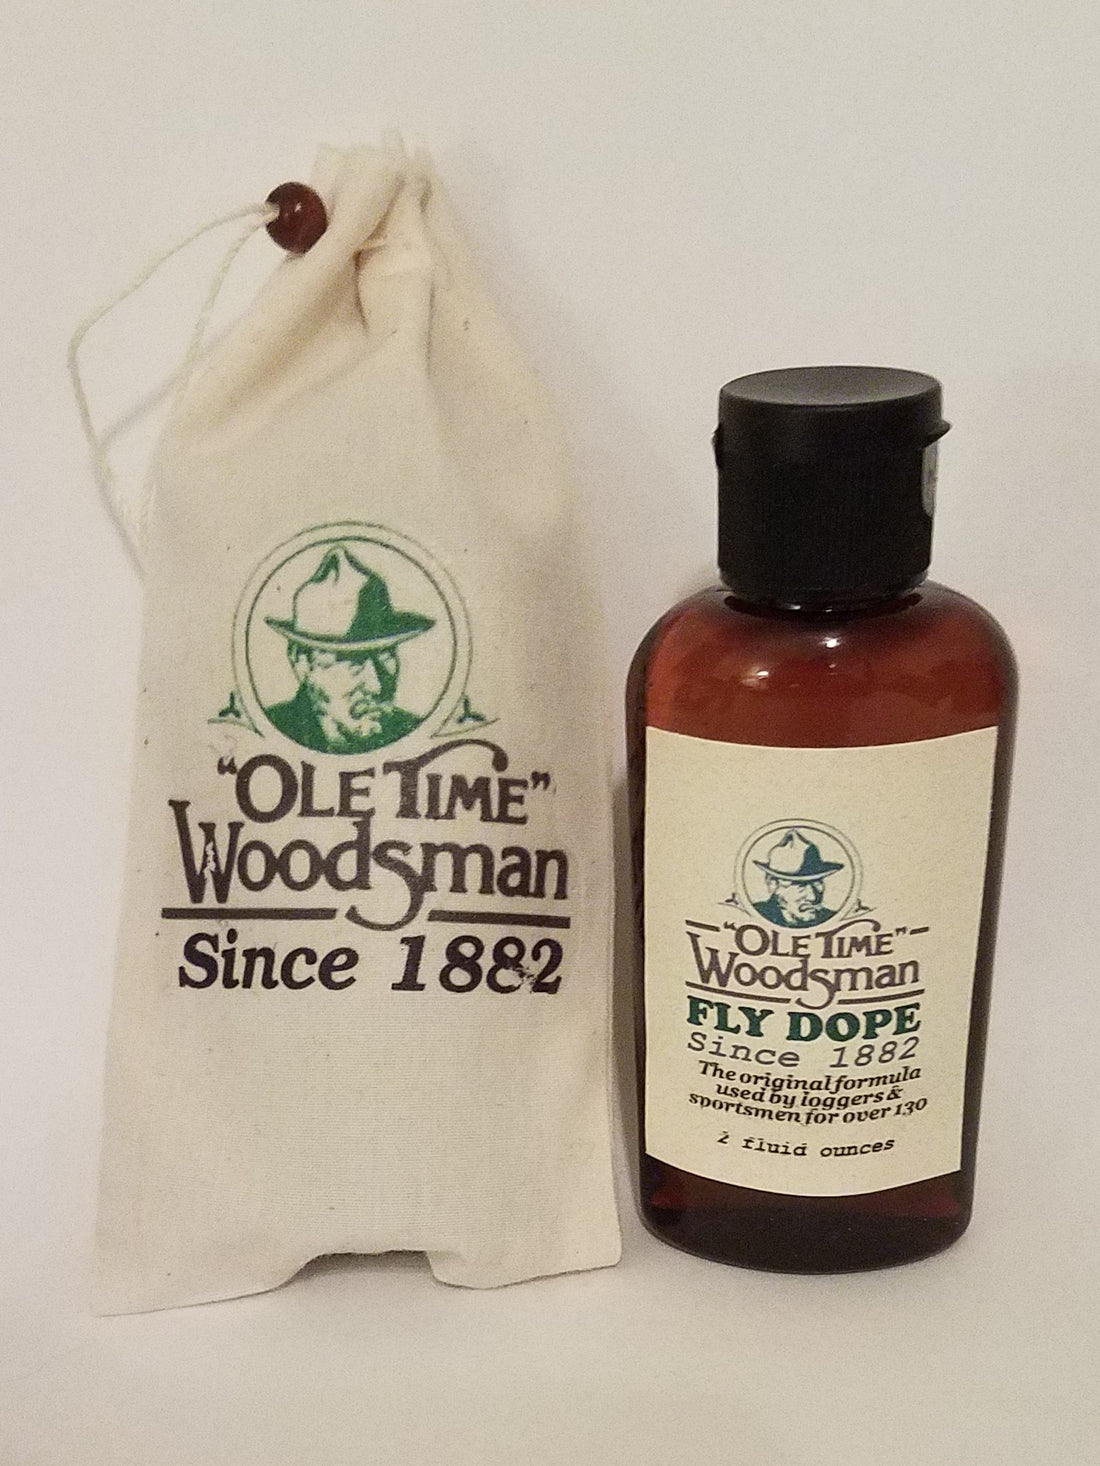 What do you use for Deer Flies?  If any information does not include Ole Time Woodsman Fly Dope then do not believe it!